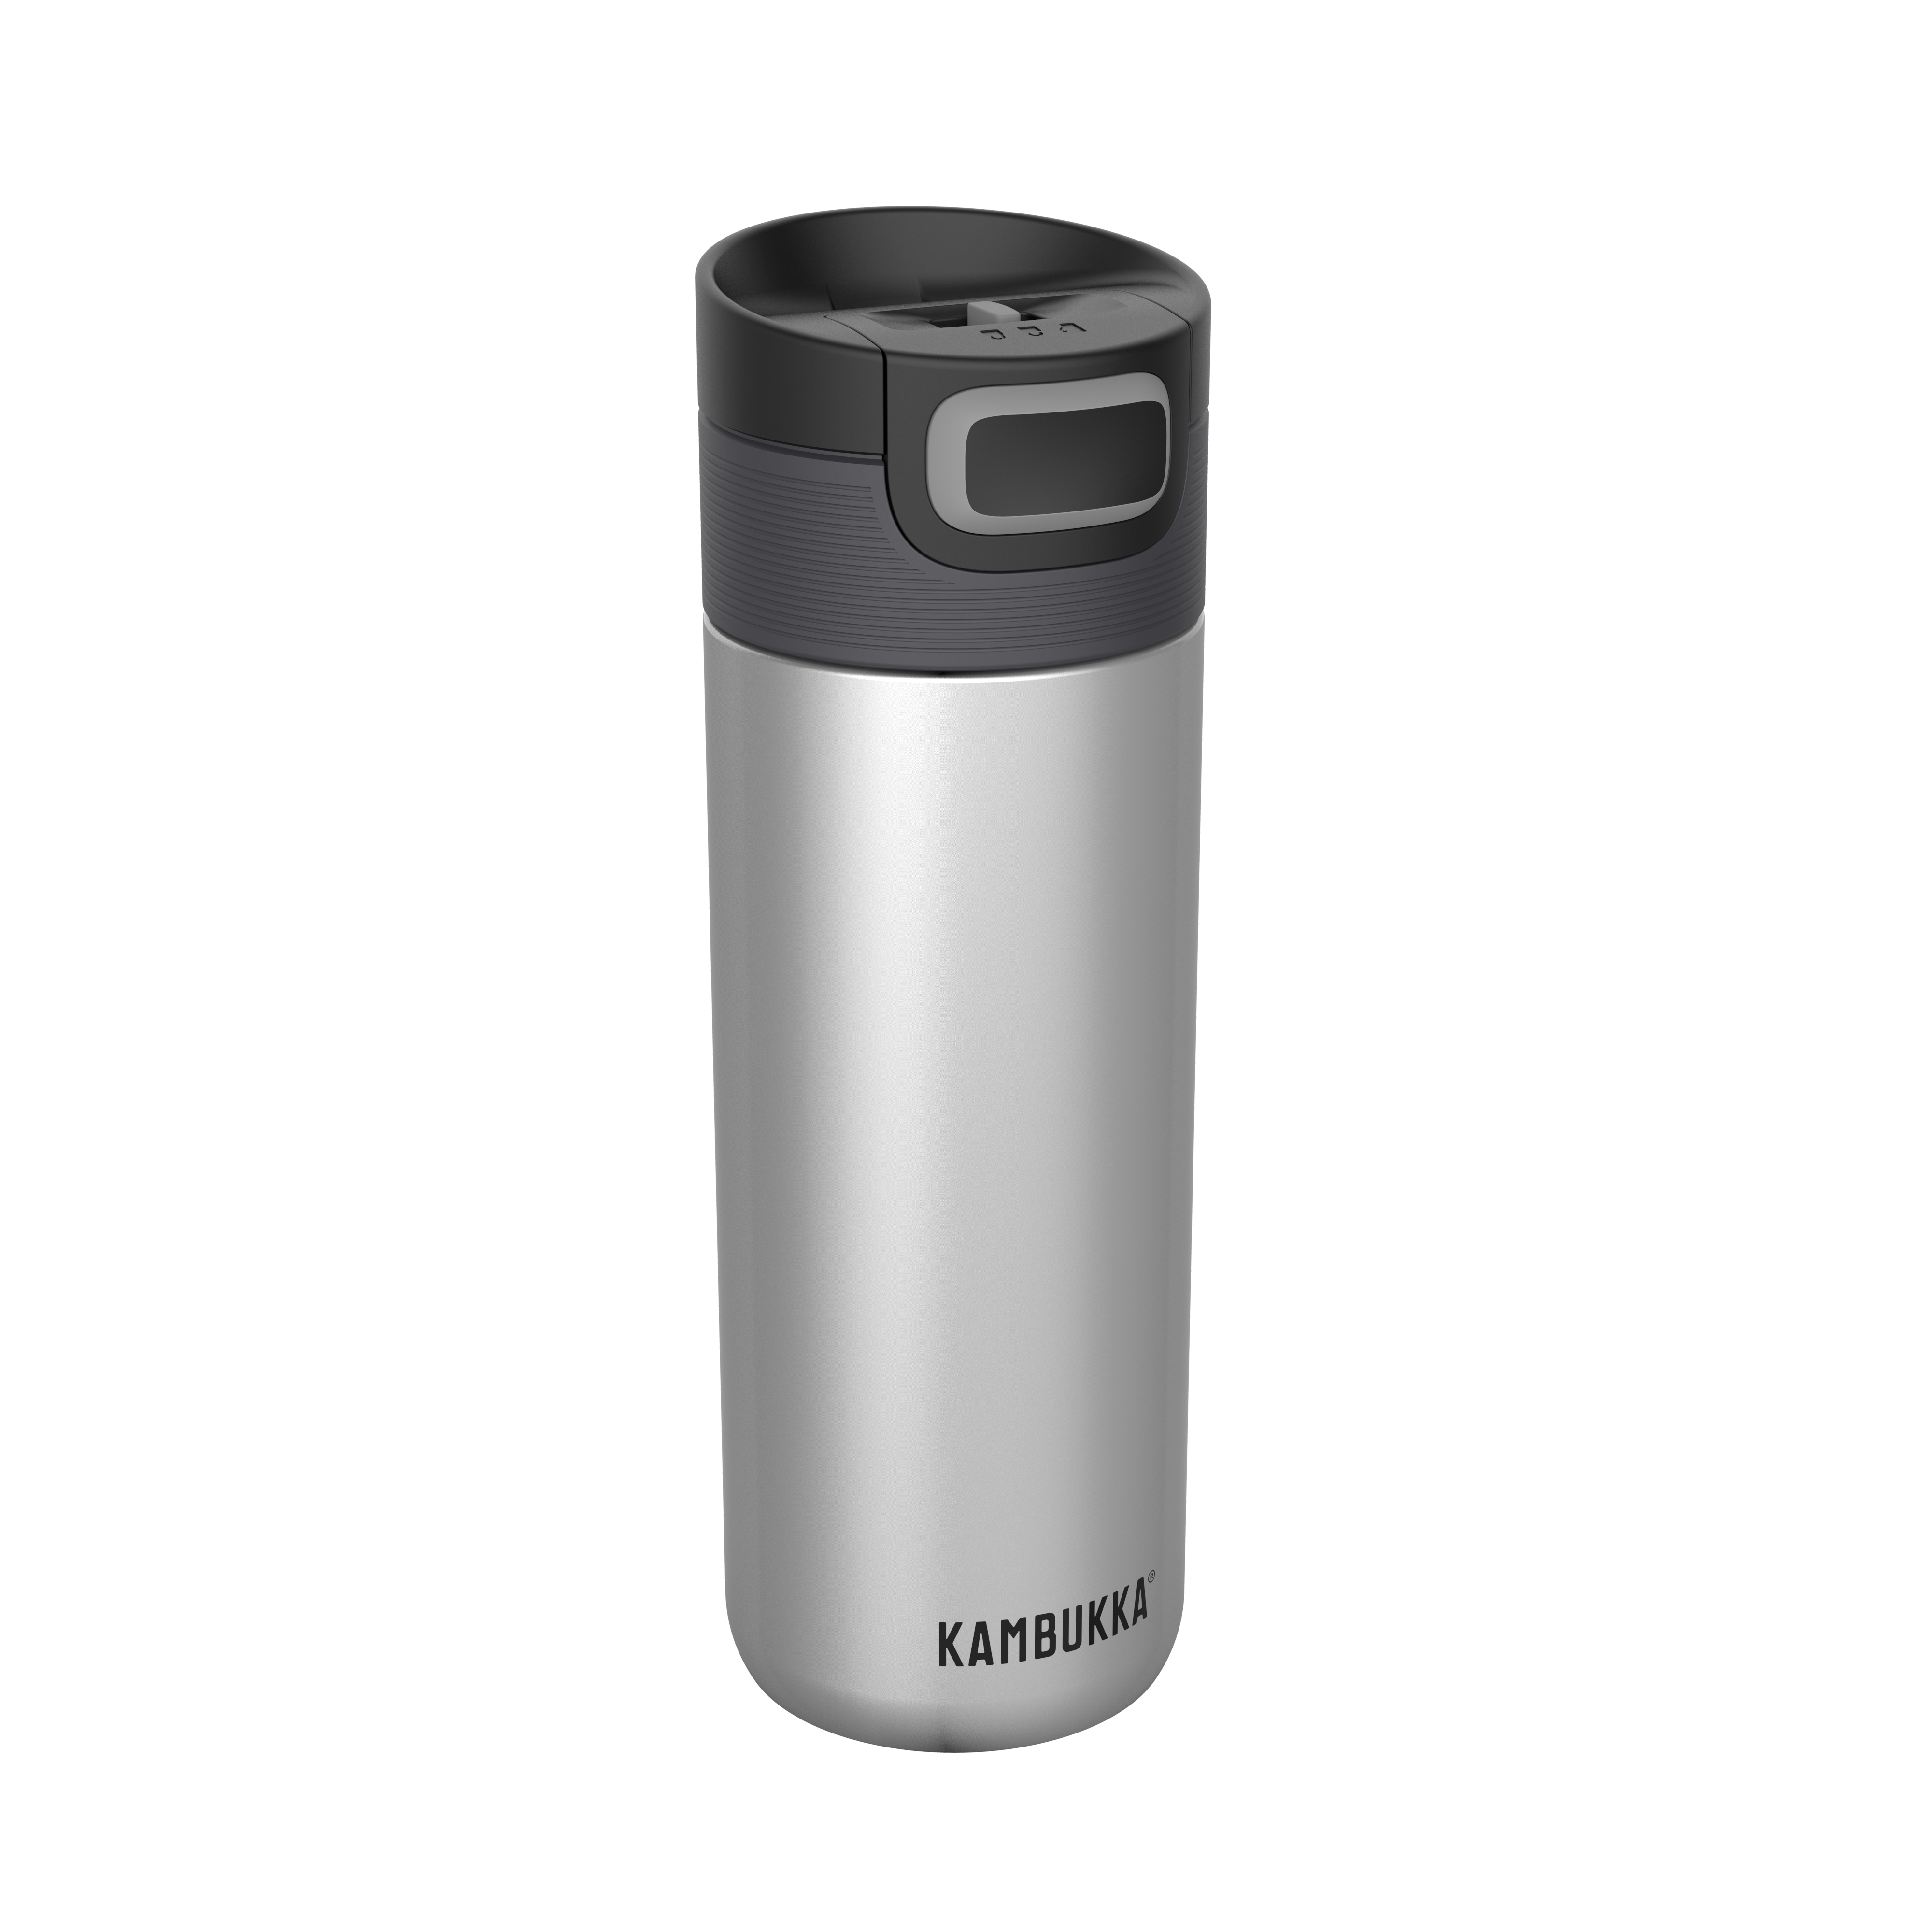  Kambukka - Thermal Mug 500 ml - Model ETNA Denim Blue - Thermal  Mug/Coffee Mug to Go: Easy Cleaning - Stainless Steel Keeps Drinks Hot or  Cold for Hours: Home & Kitchen